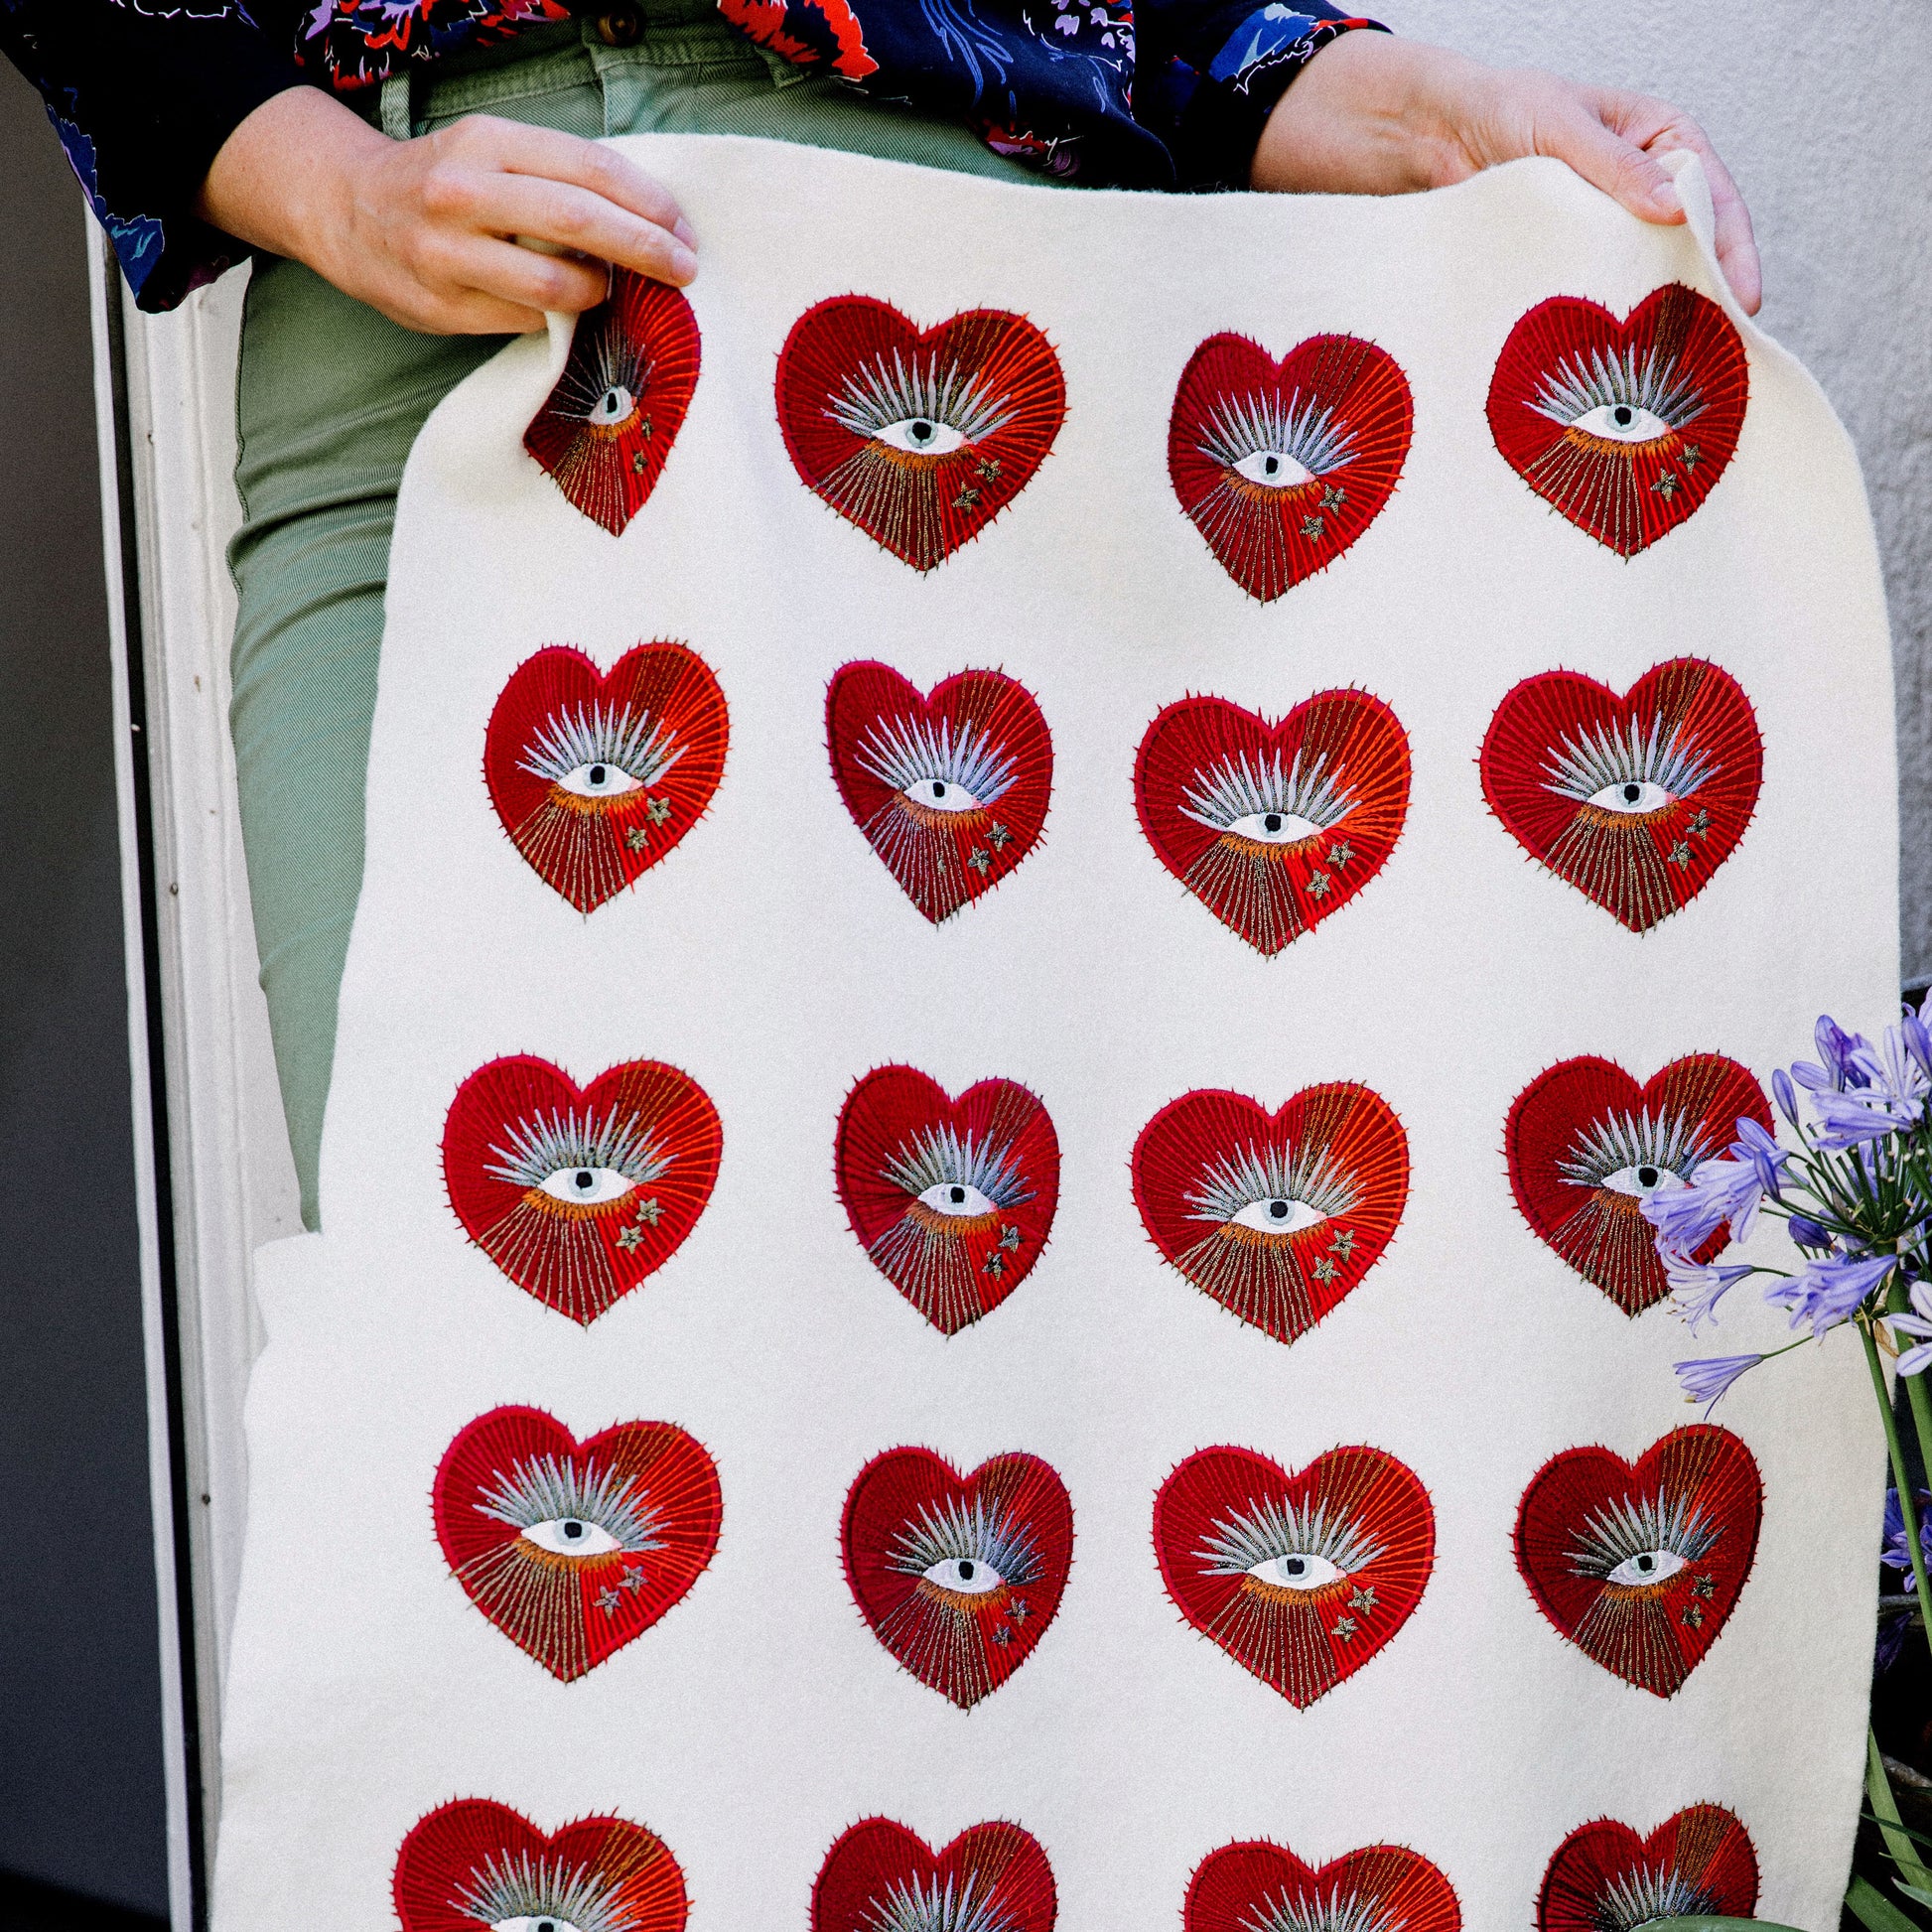 A selection of pre-cut sacred heart with eye embroidered patches held up by two hands